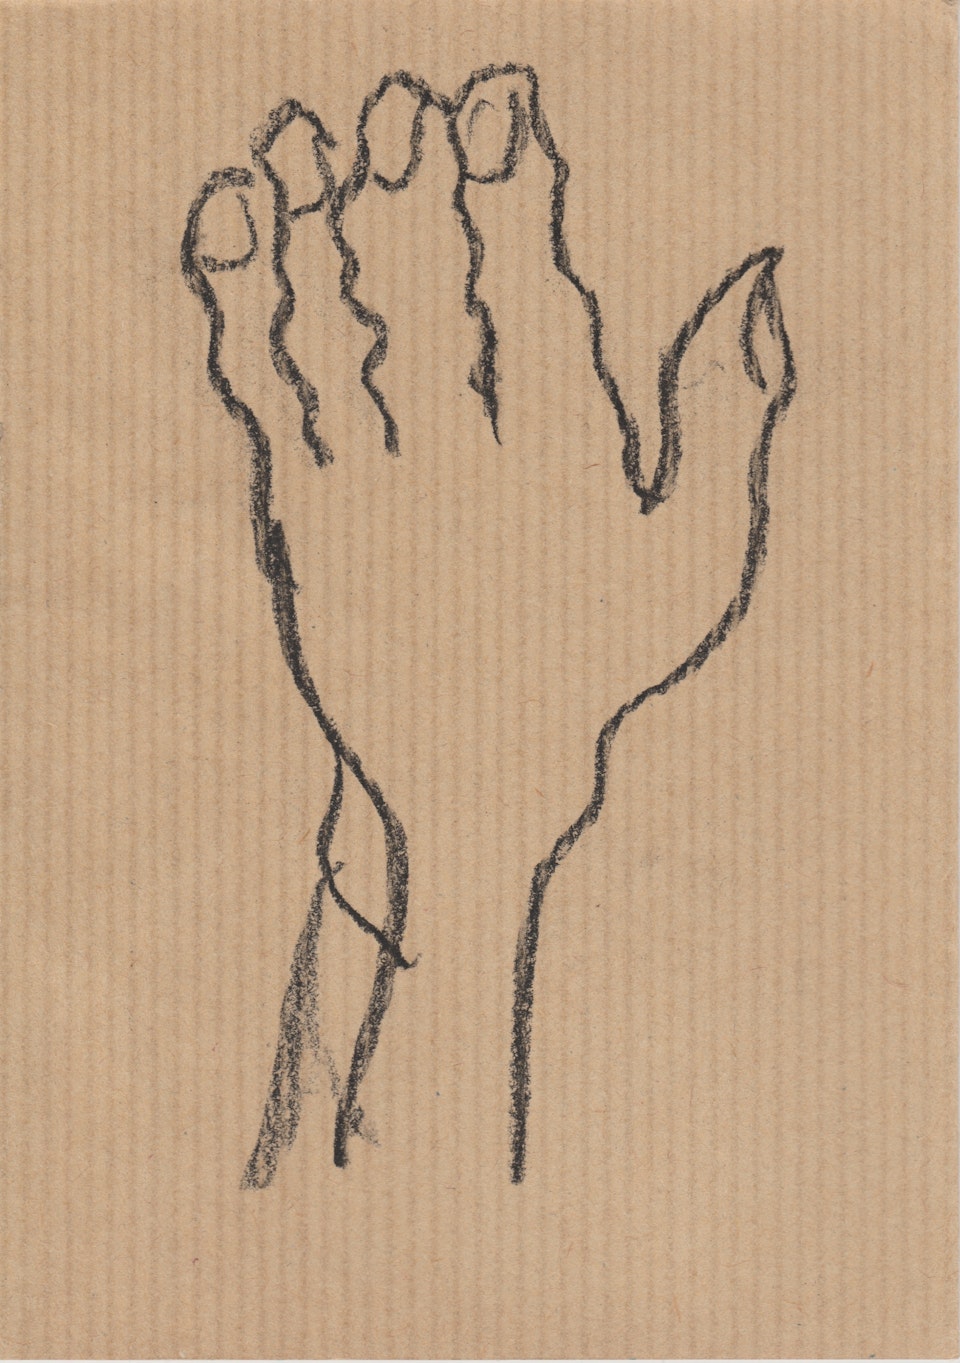 People - Hand - 2020 - Charcoal on Brown Paper - 10 x 15 cm A6